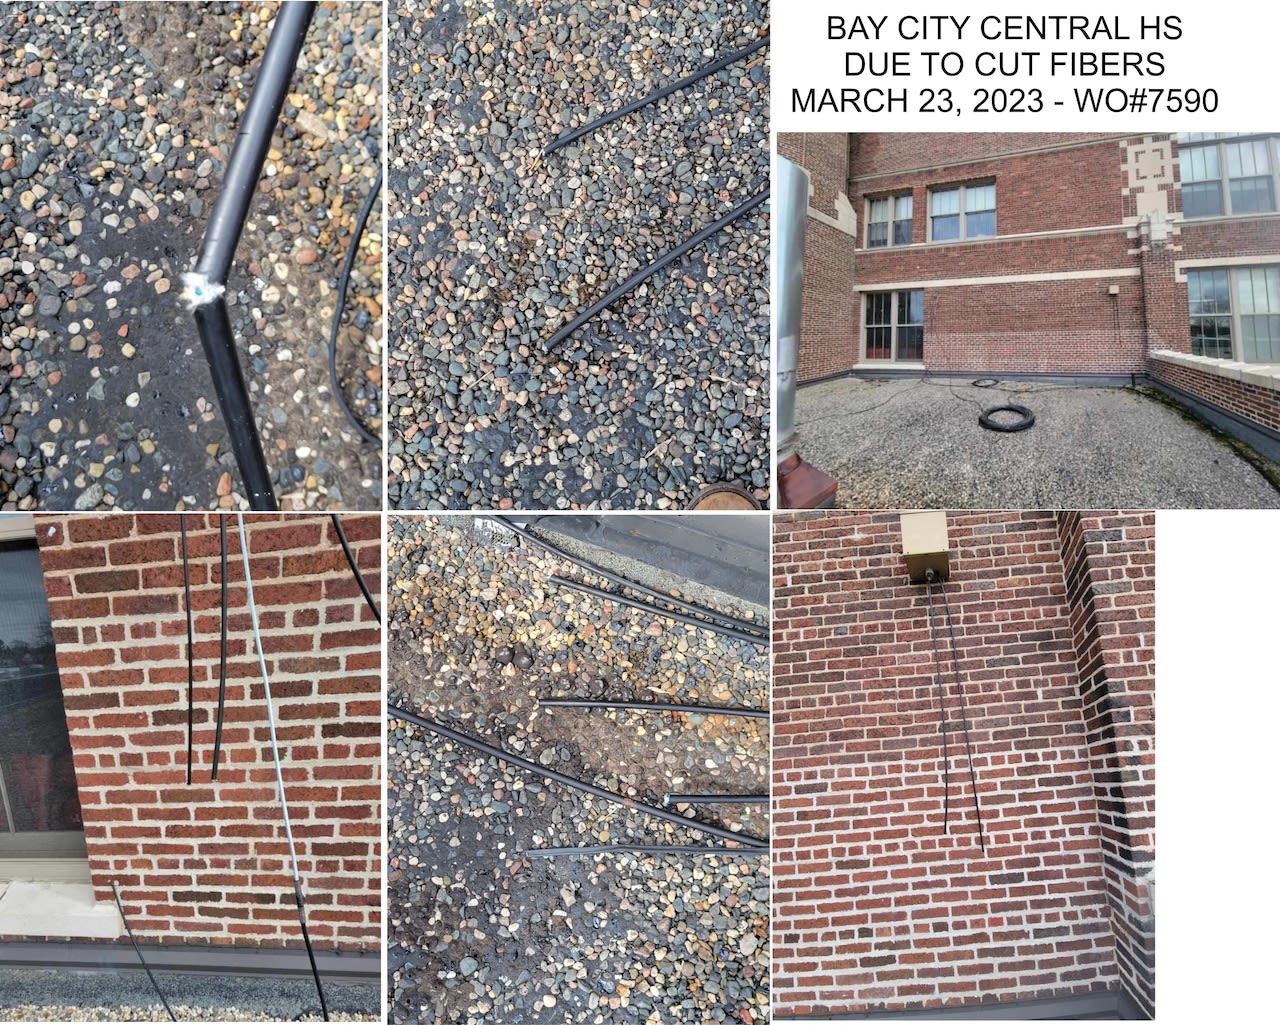 Bay City Central’s internet cables were cut during school threat, costing $13k in damage